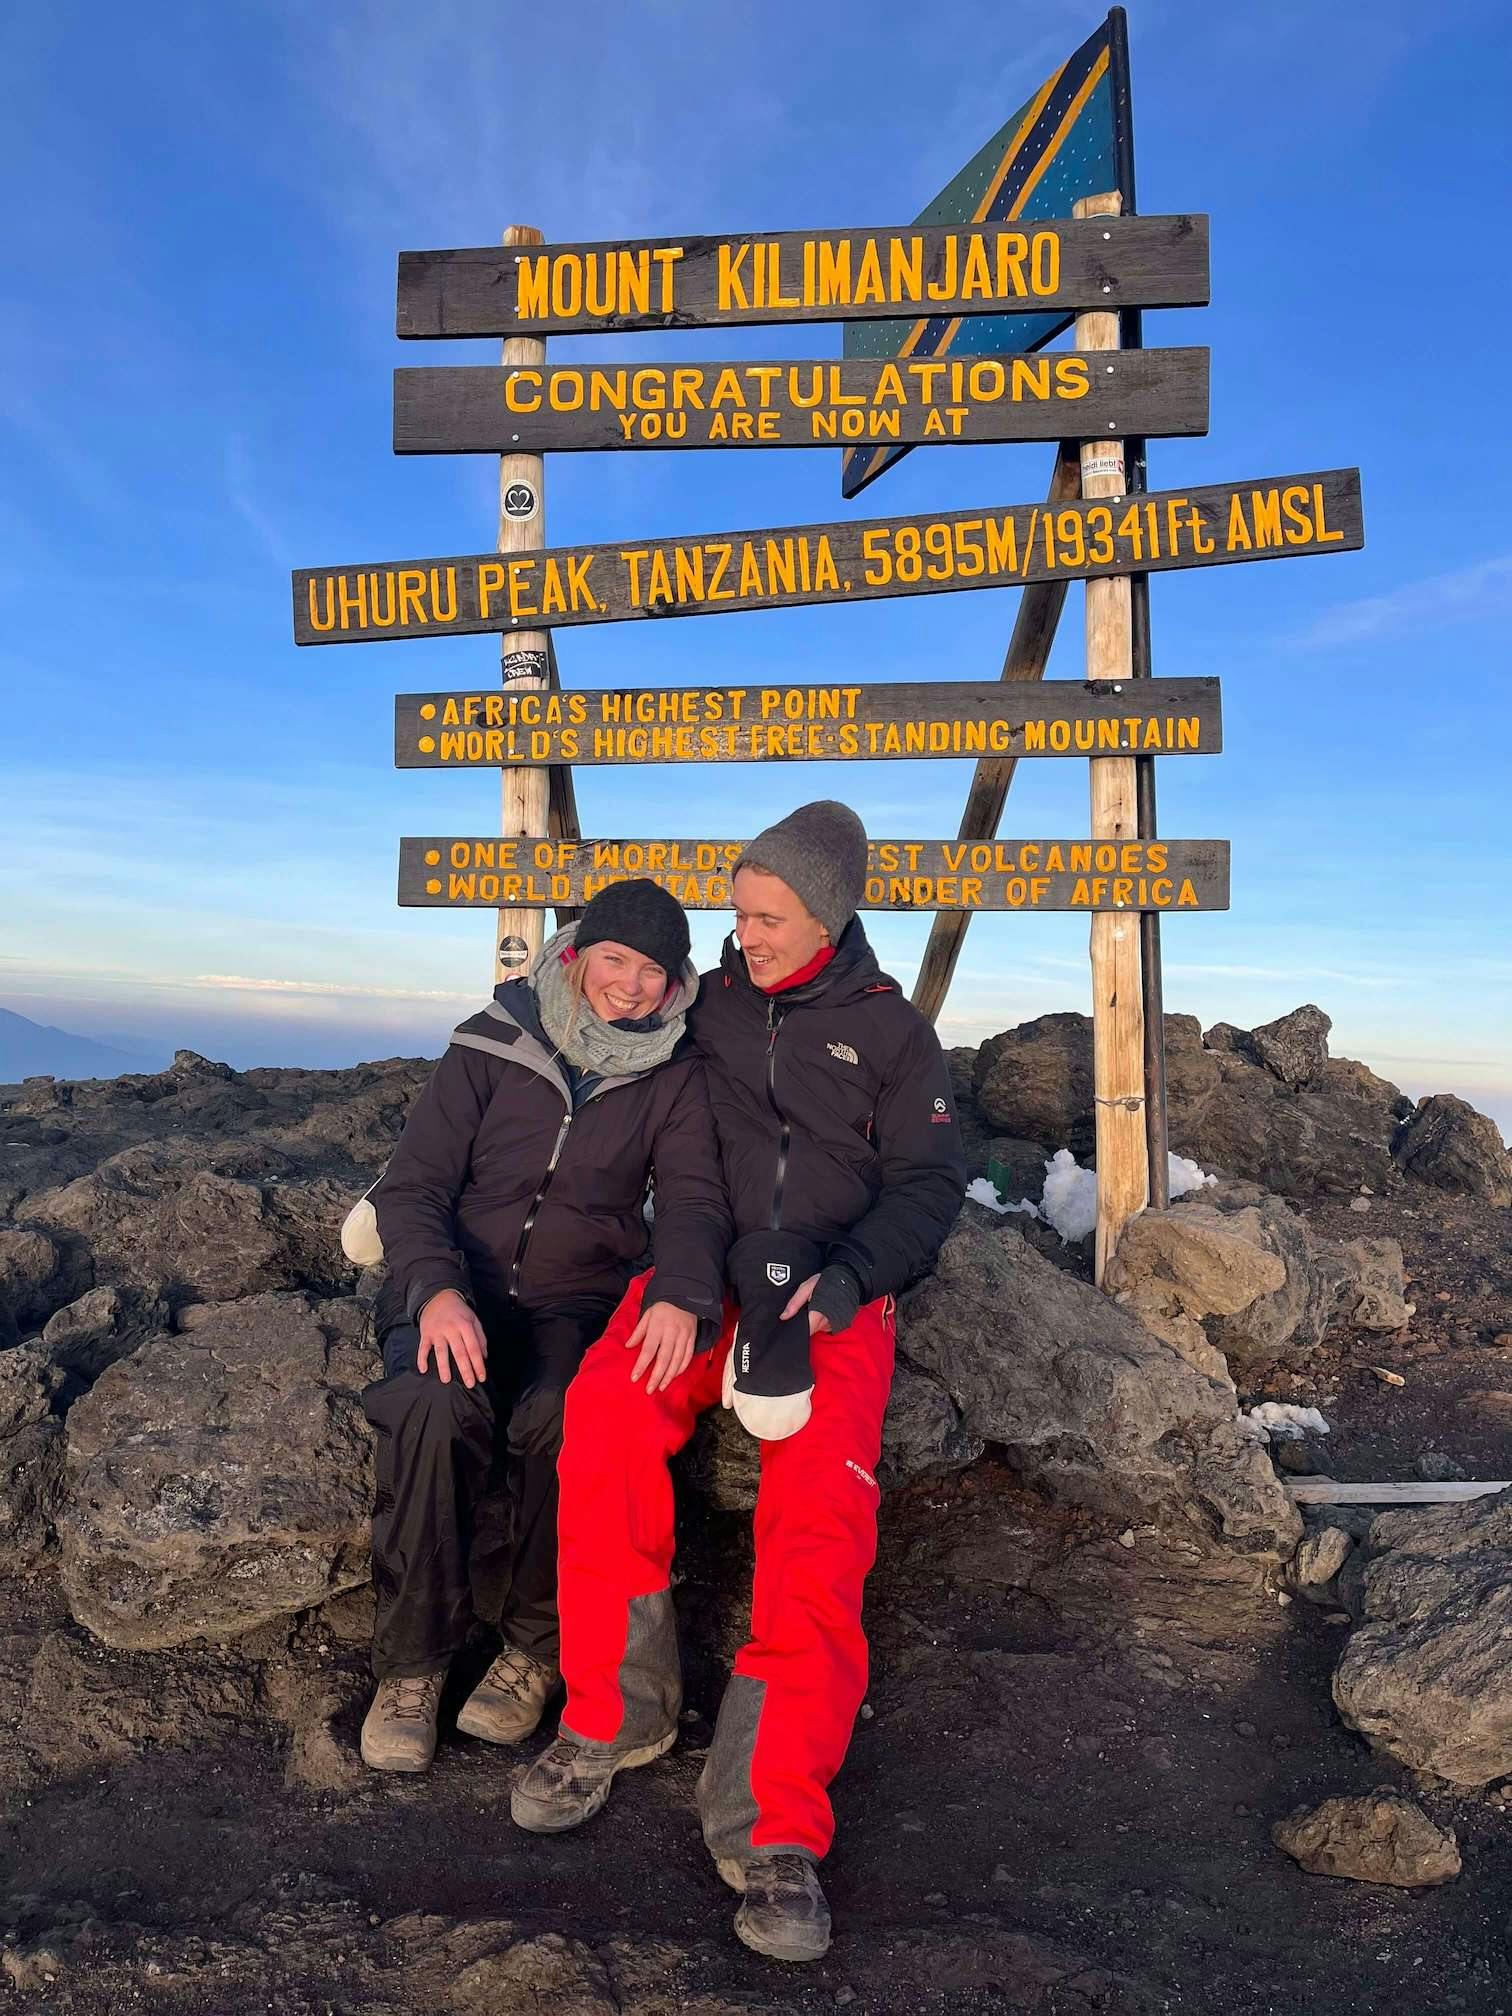 Me and my wife Laura on the top of Kilimanjaro in Tanzania